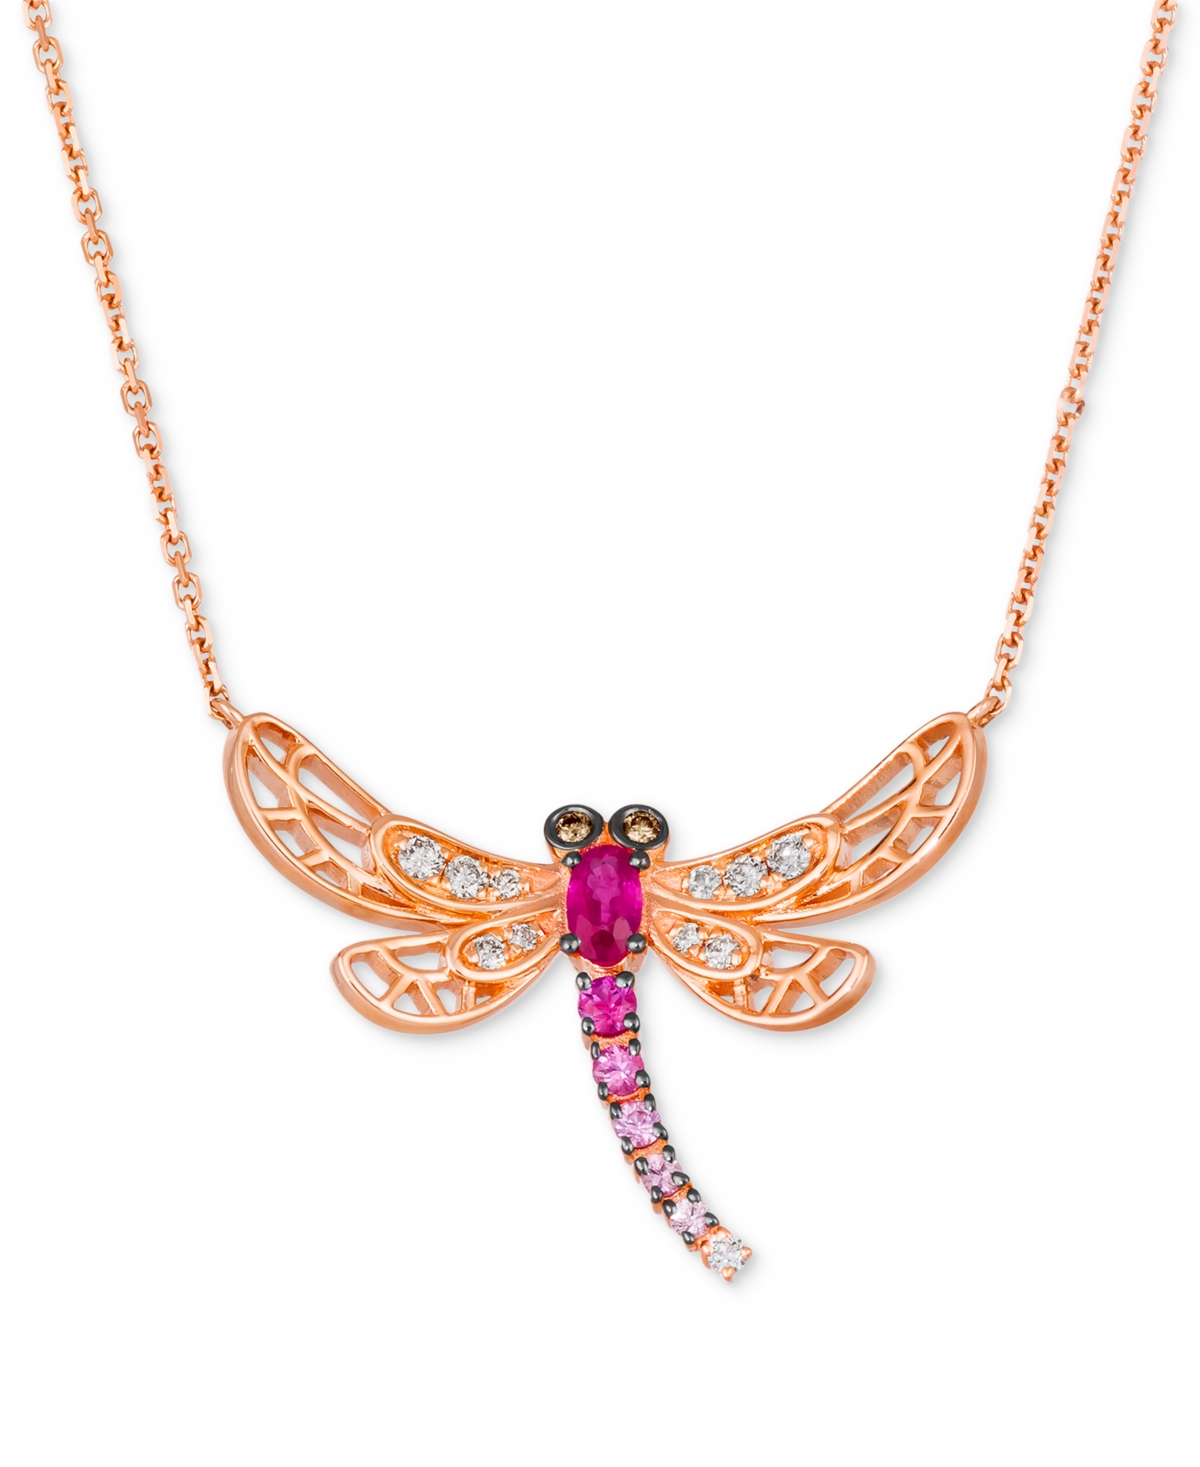 Le Vian Multi-Gemstone (3/8 ct. t.w.) & Diamond (1/6 ct. t.w.) Dragonfly Pendant Necklace in 14k Rose Gold, 18" + 2" extender